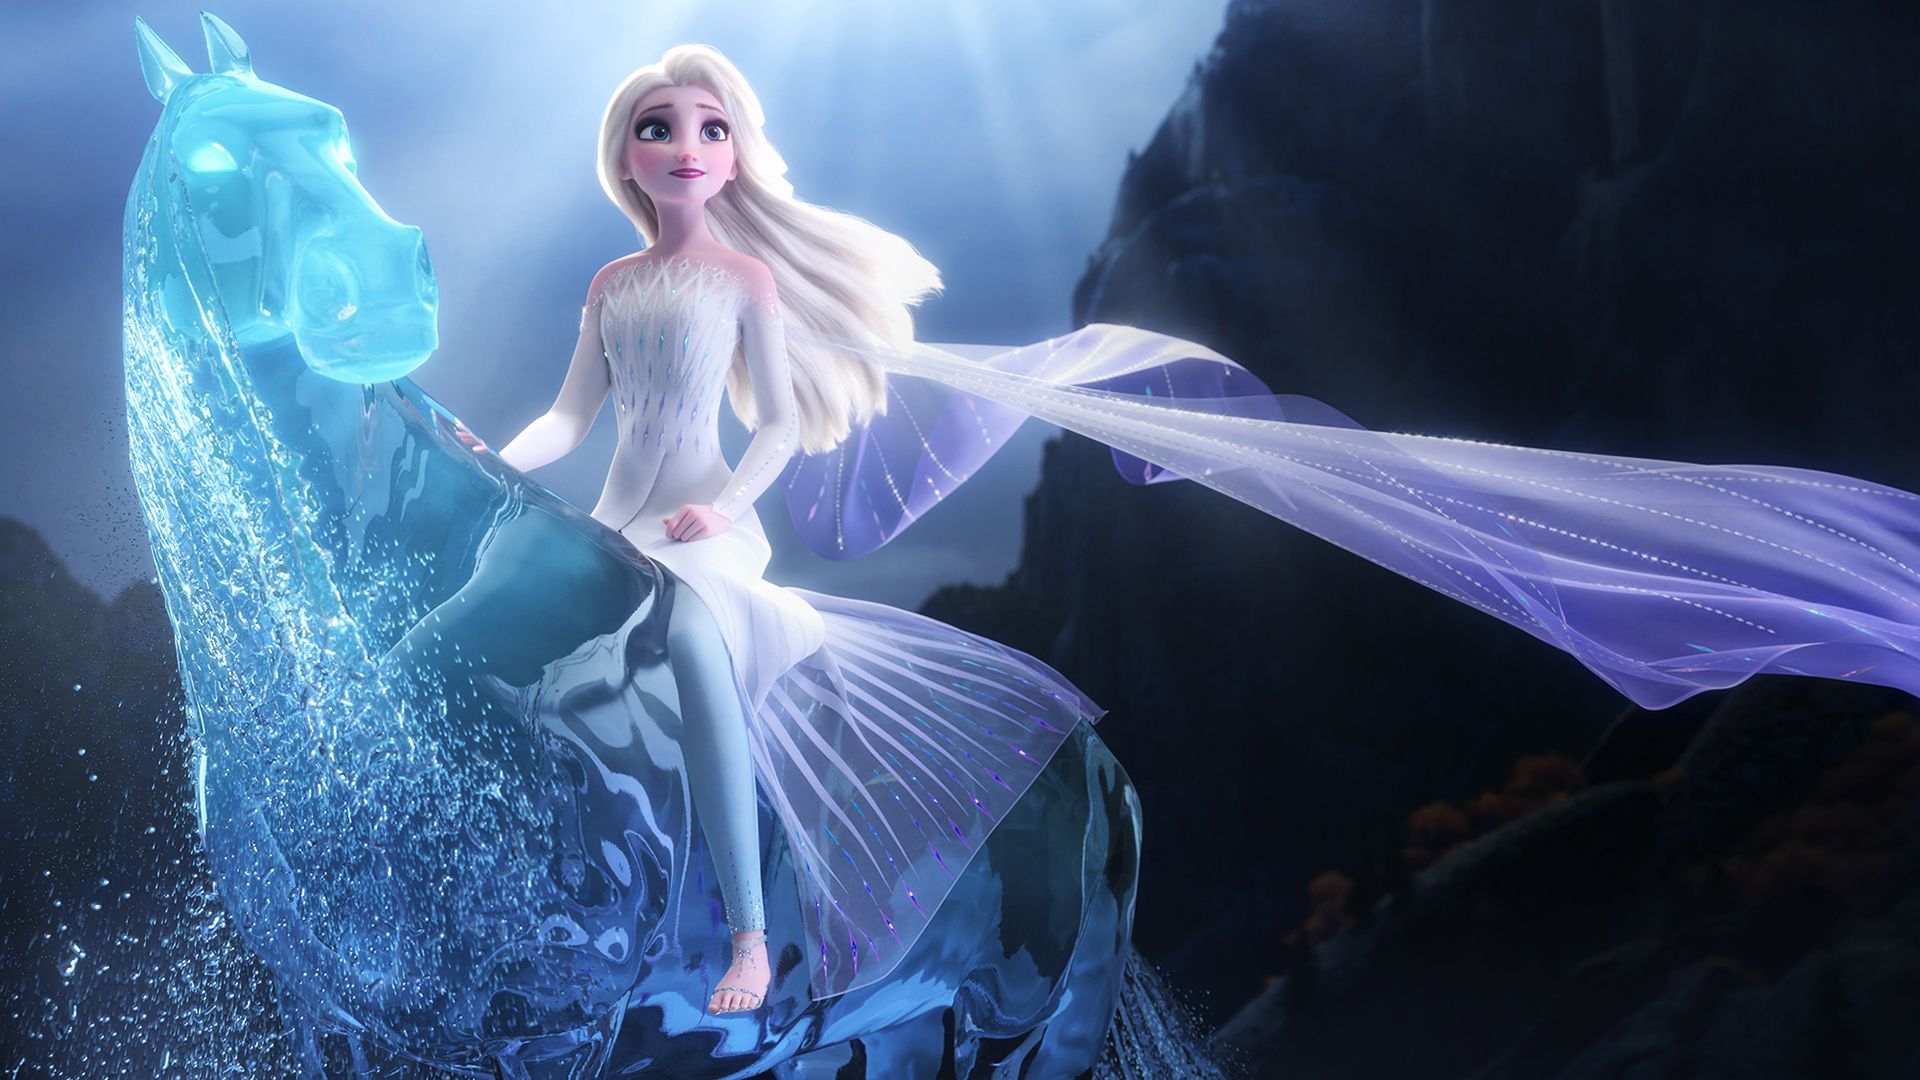 New HD Image Of Elsa As The Fifth Element From The Frozen 2 Final Shows That She Is Not Barefoot. Elsa Got Very Delicate Semi Transparent Sandals With Crystals